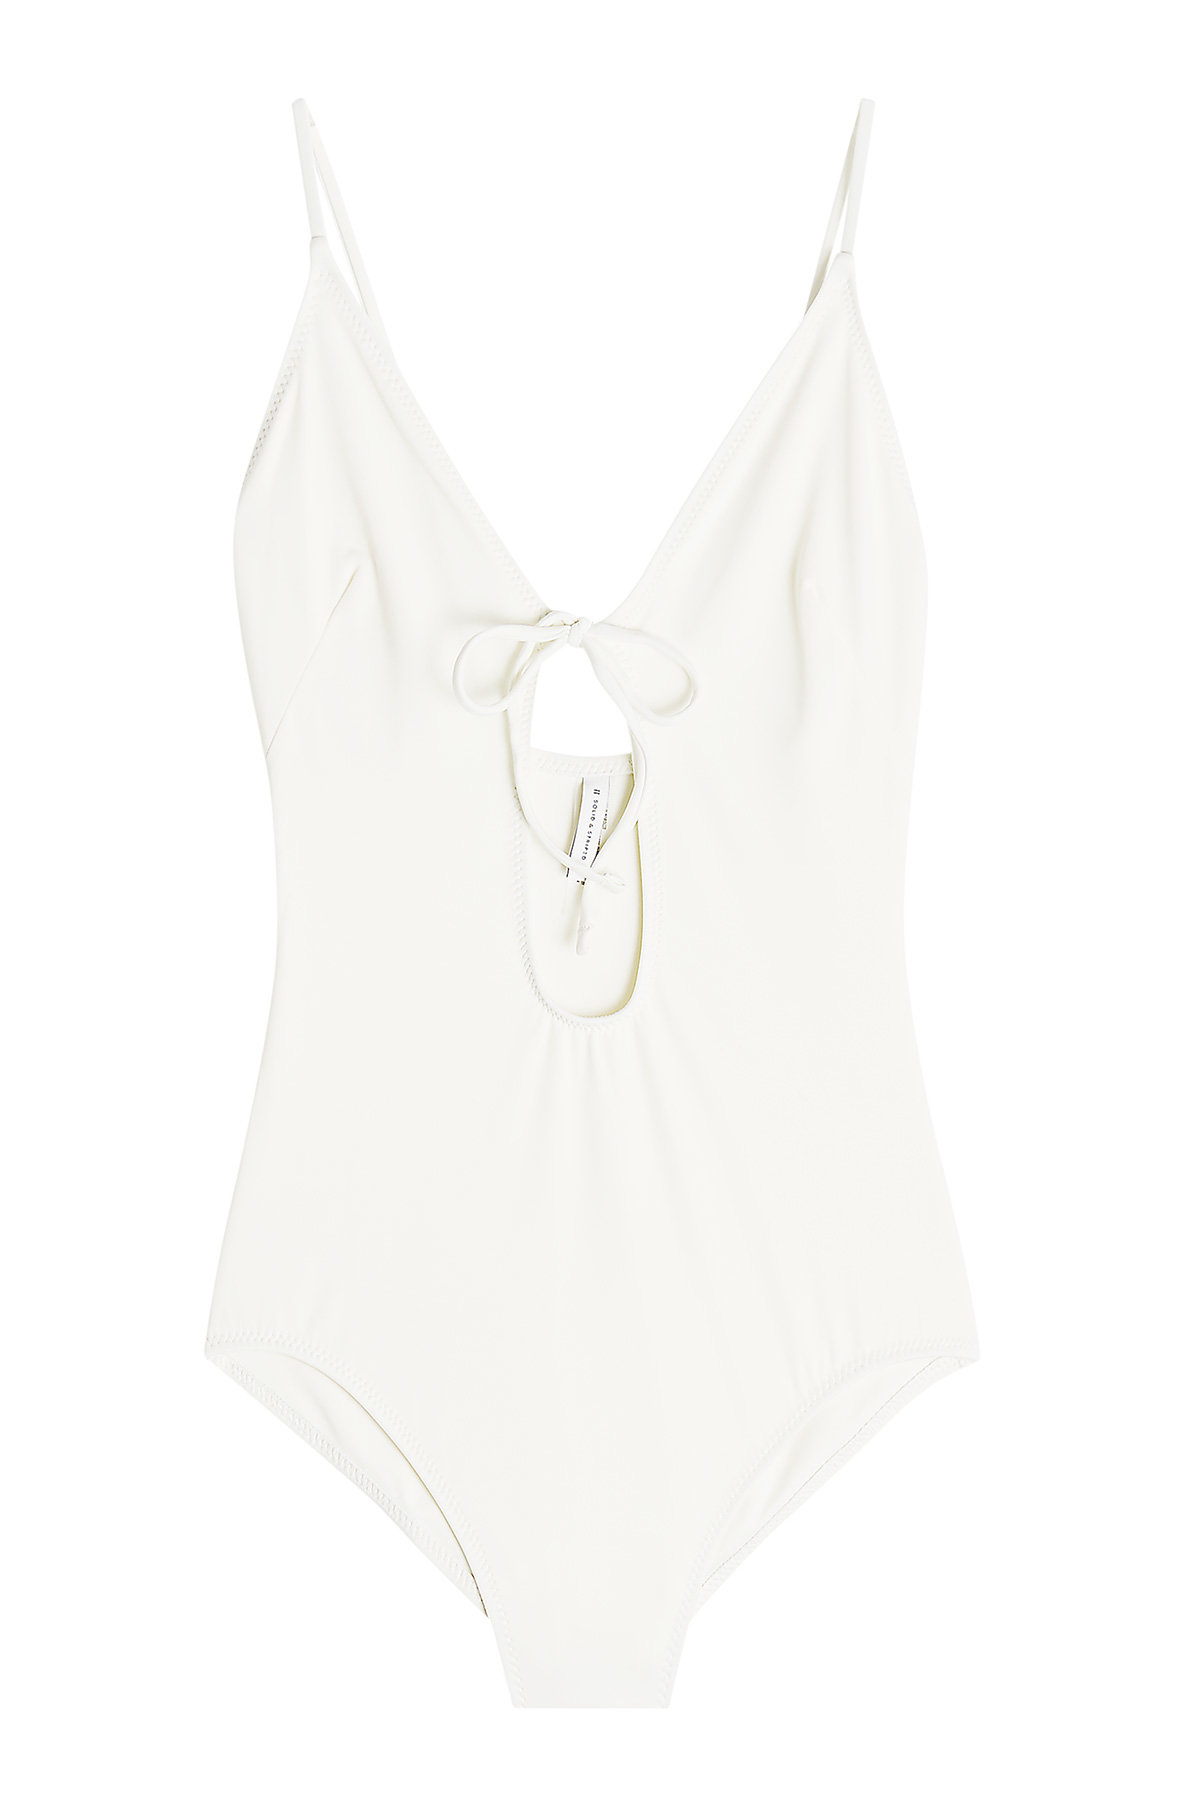 The Kelsey Swimsuit by Solid & Striped